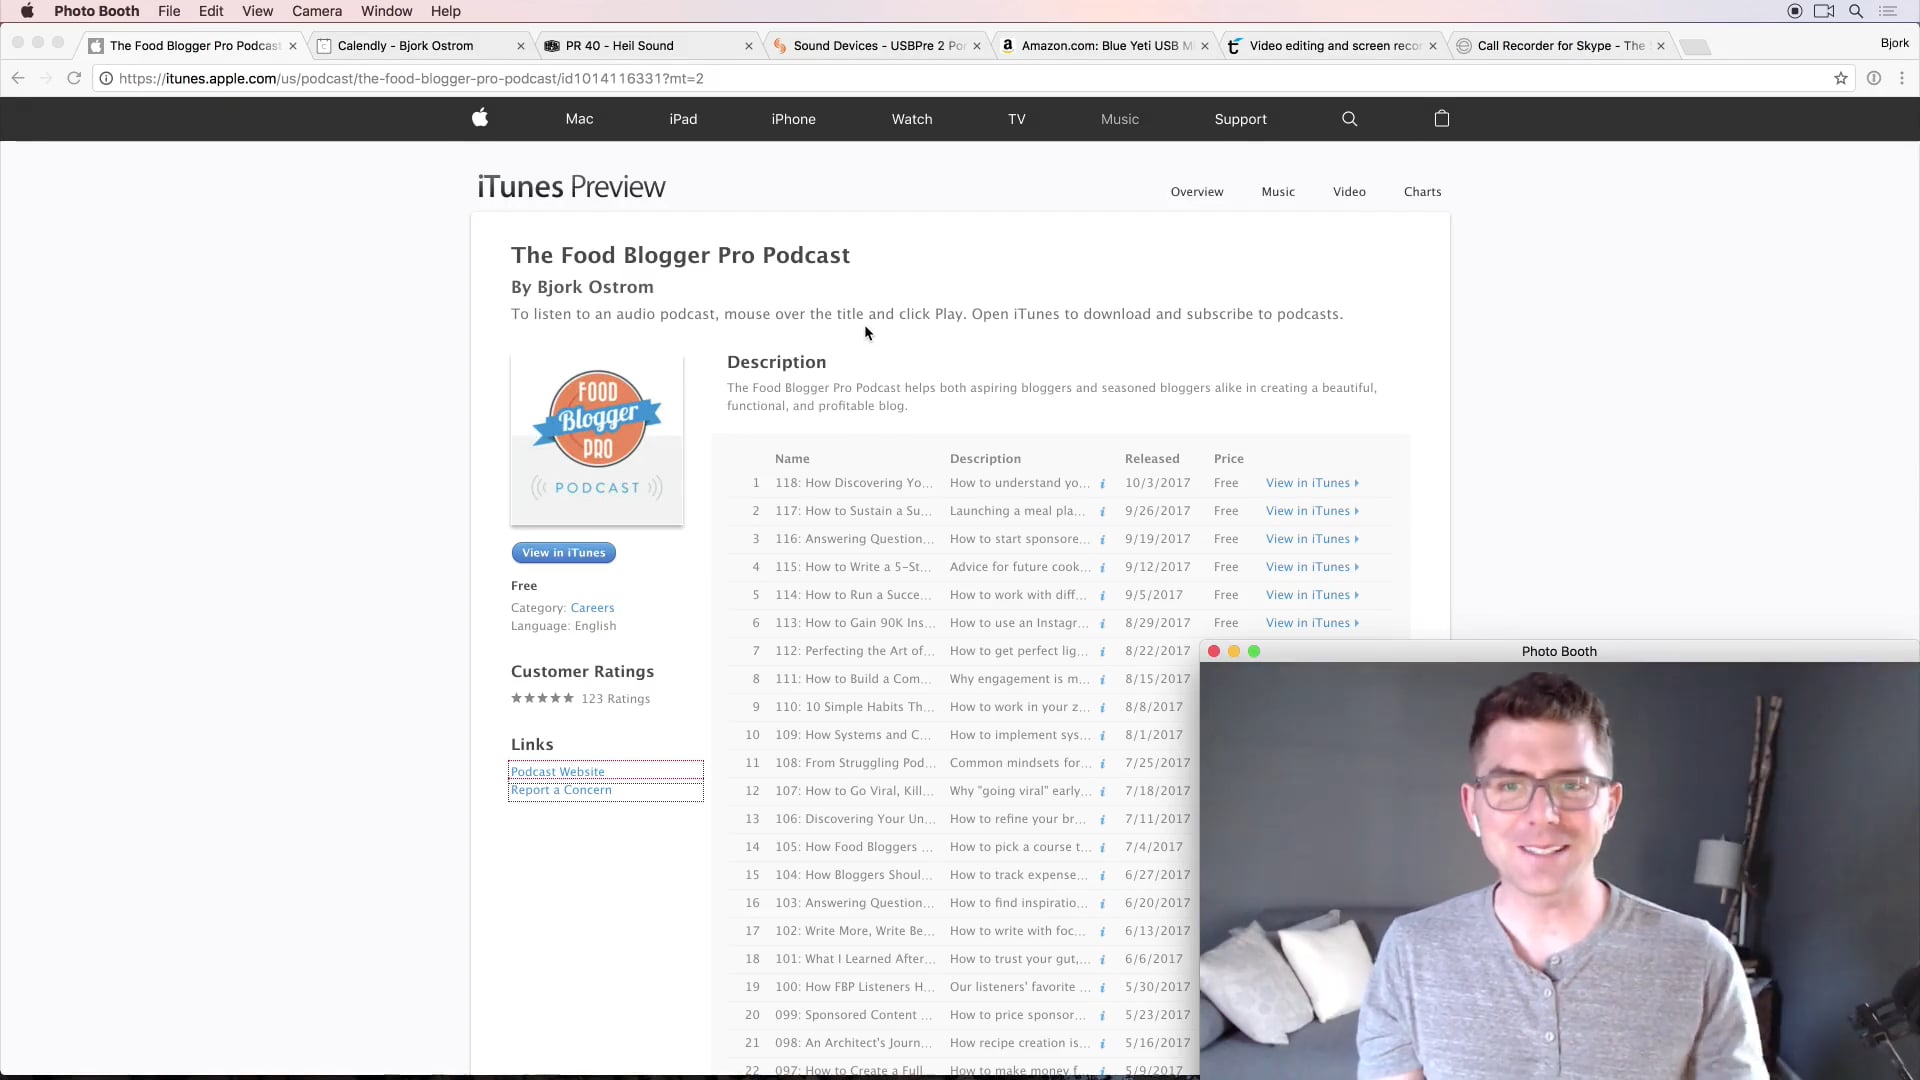 Screenshot of The Food Blogger Podcast on iTunes with Bjork Ostrom's face in the bottom righthand corner